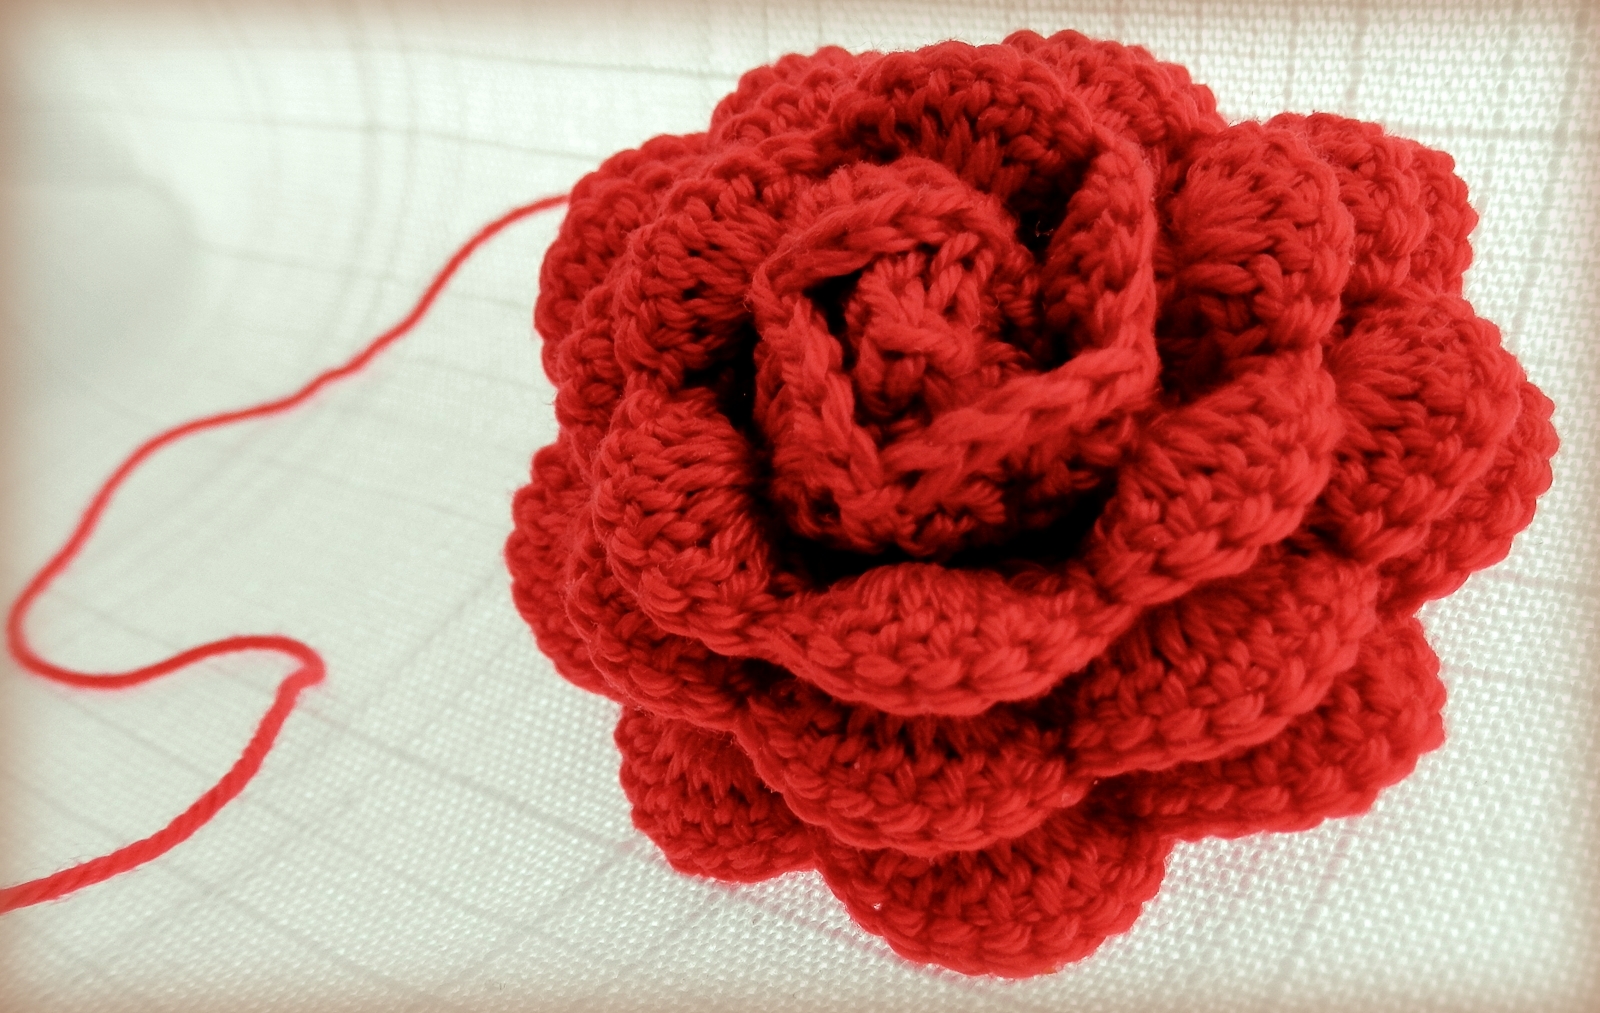 Crochet Rose Pattern and Step by Step Tutorial Tutorials & More